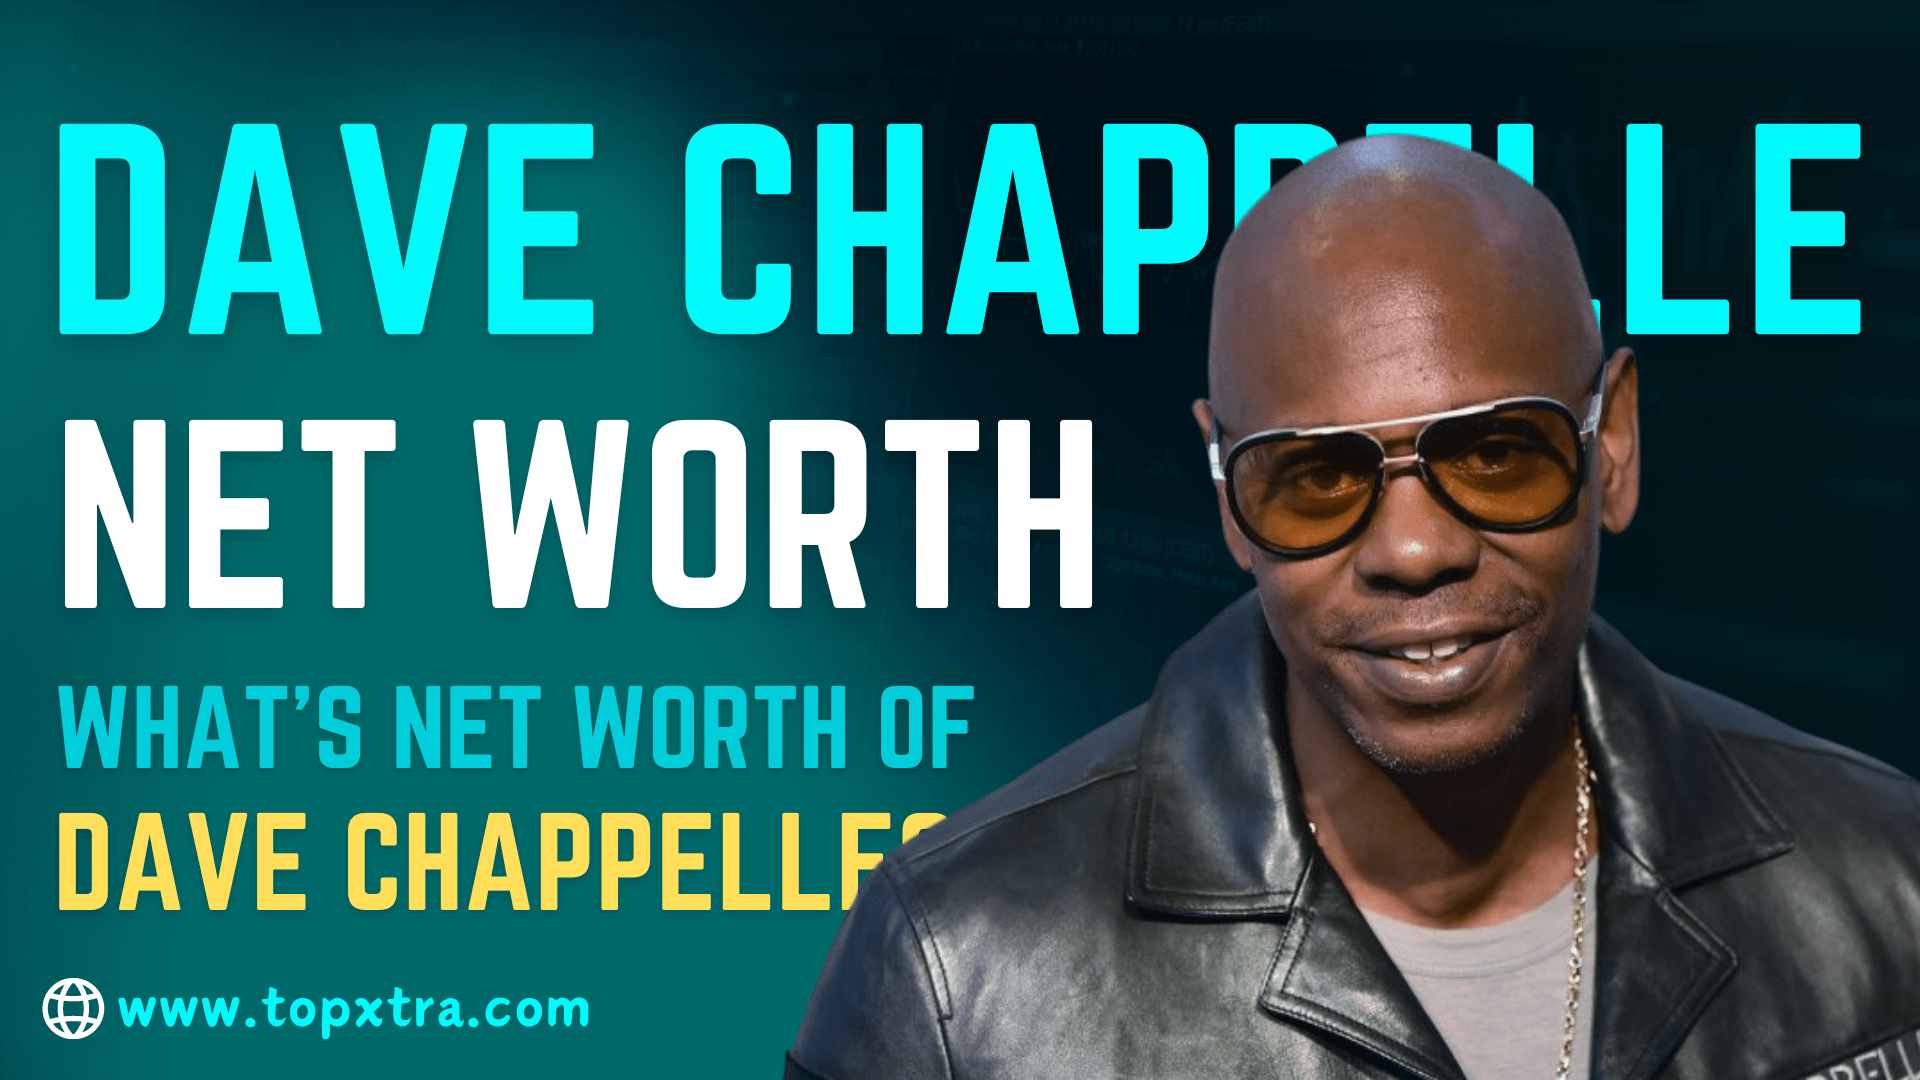 Dave Chappelle Net Worth | What's Net Worth of Dave Chappelle